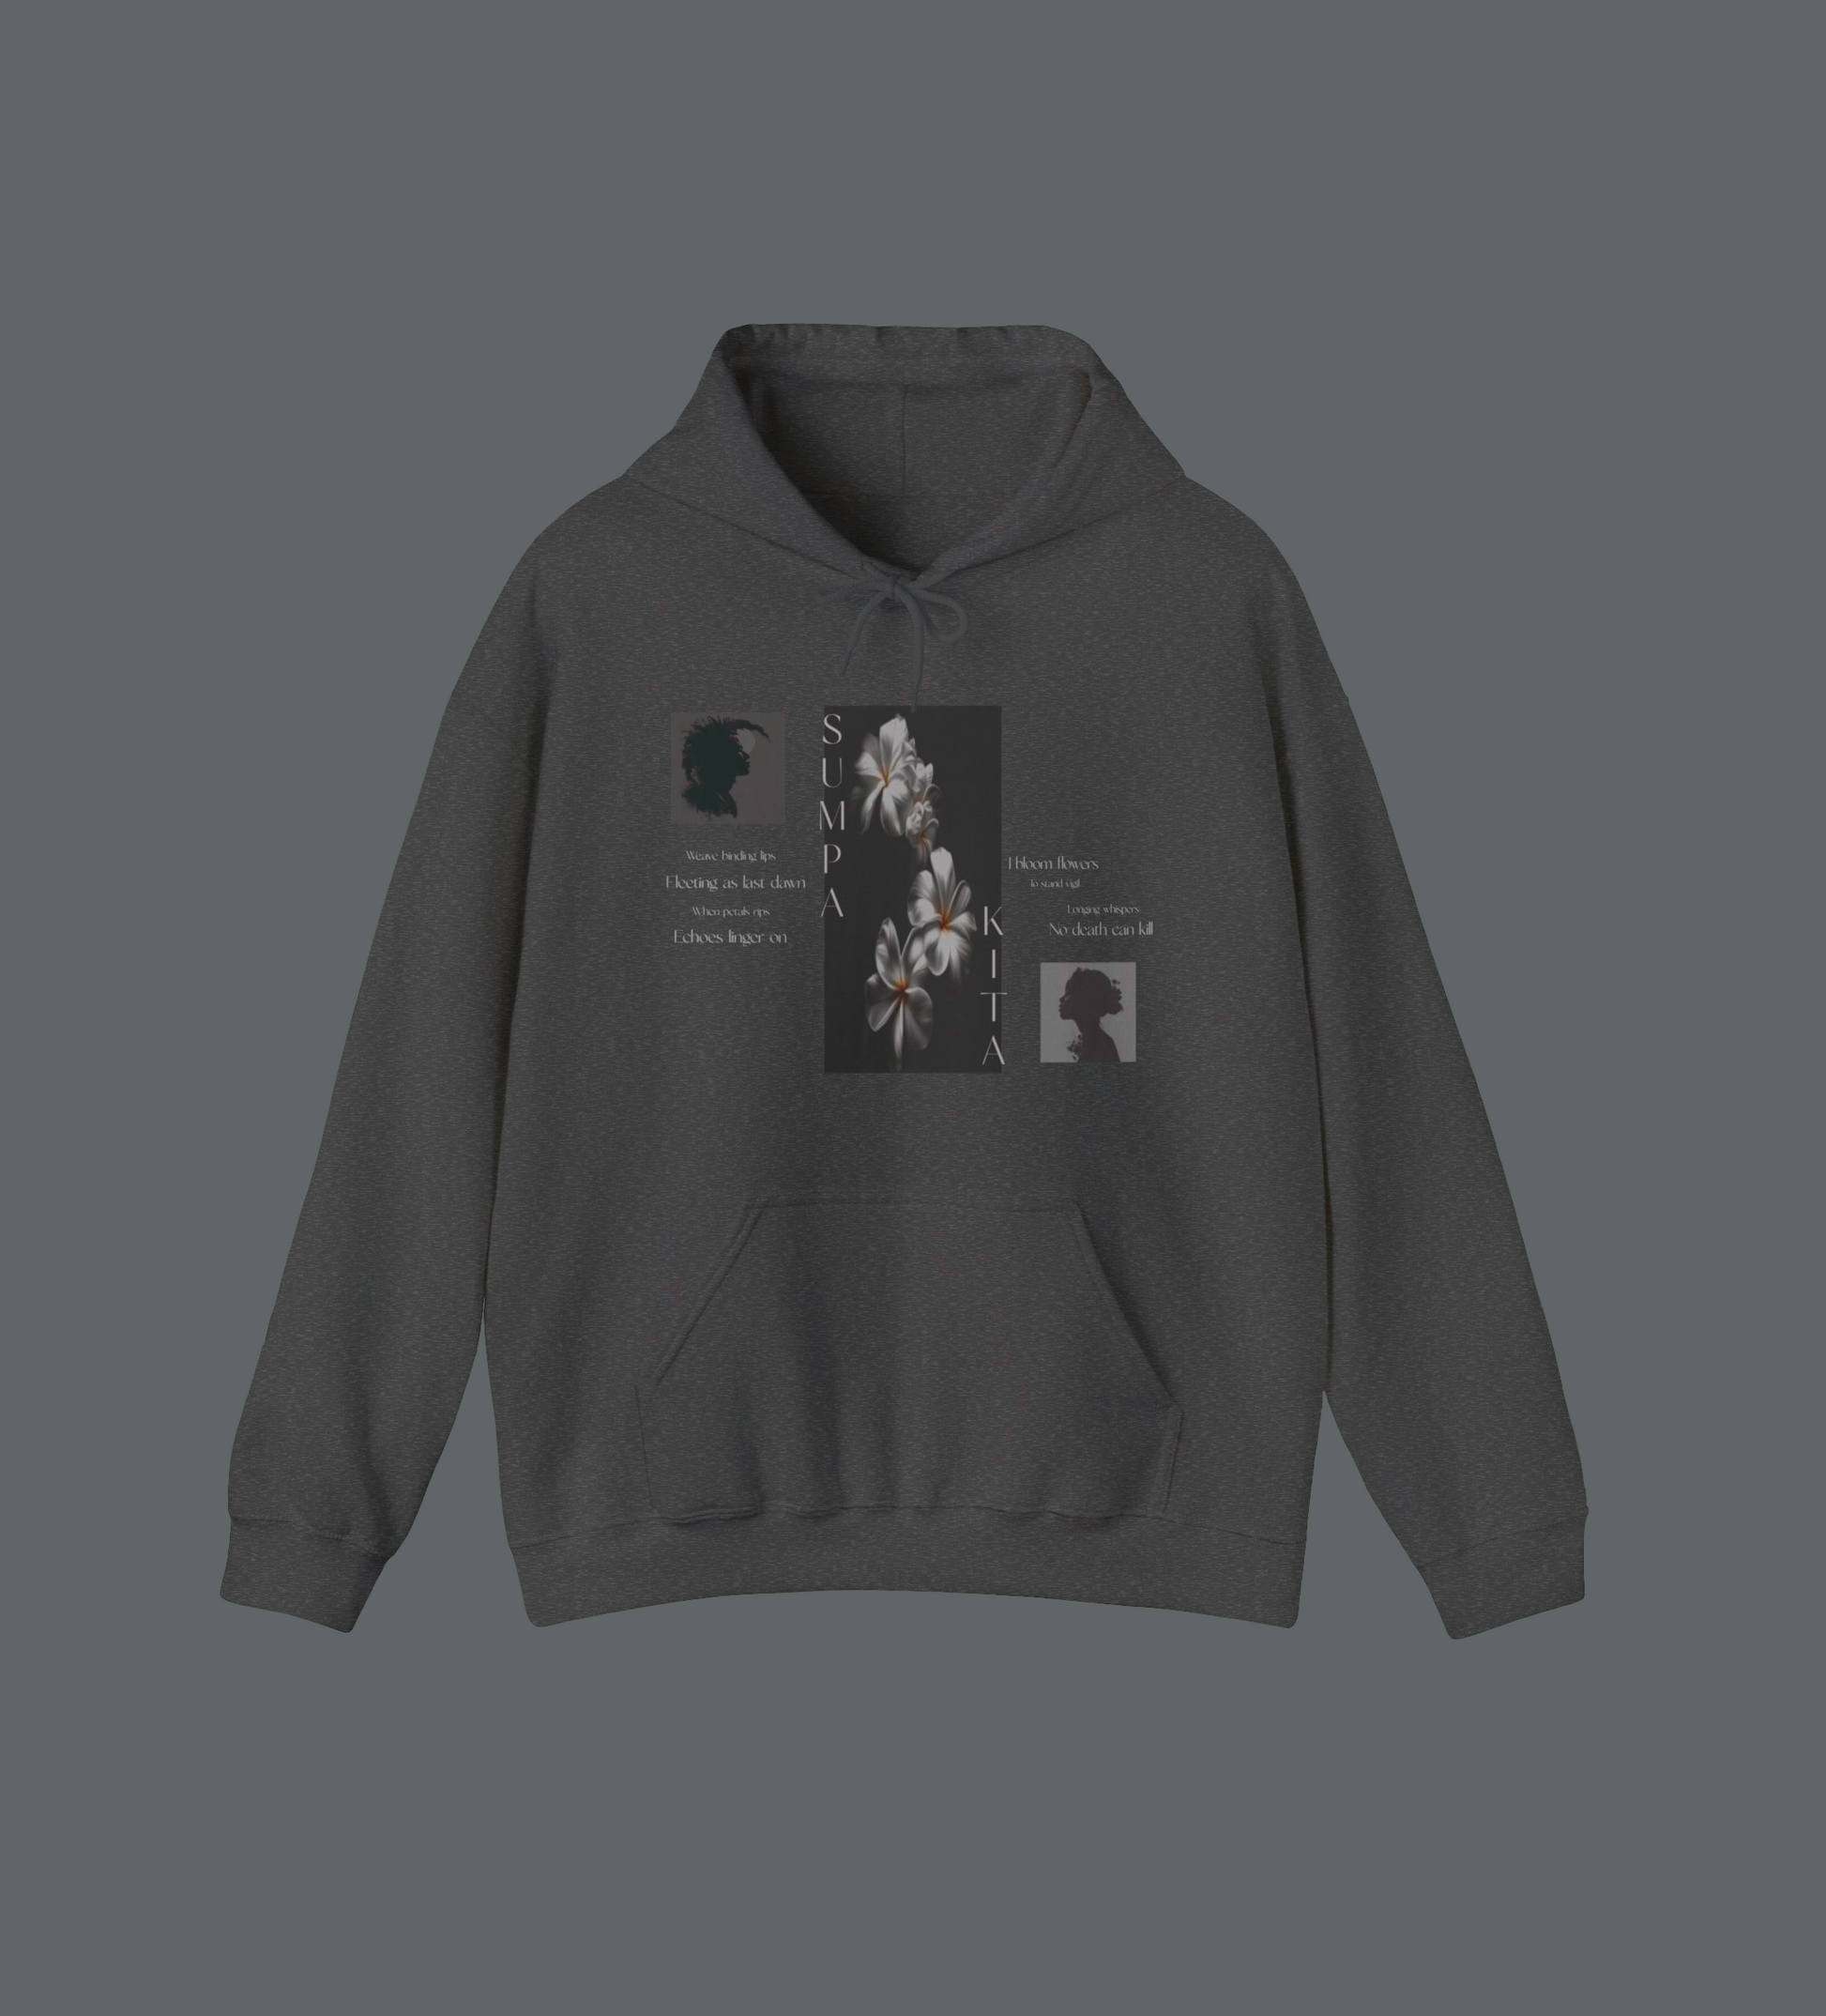 Elevate your style with this Filipino clothing brand, unisex heavy blend cotton and polyester hoodie with spacious kangaroo pocket. How long can a promise last? An artistic depiction of a floral emblem, Philippines' national flower, sampaguita, featured in this classic hoodie with soft cotton and quality print.